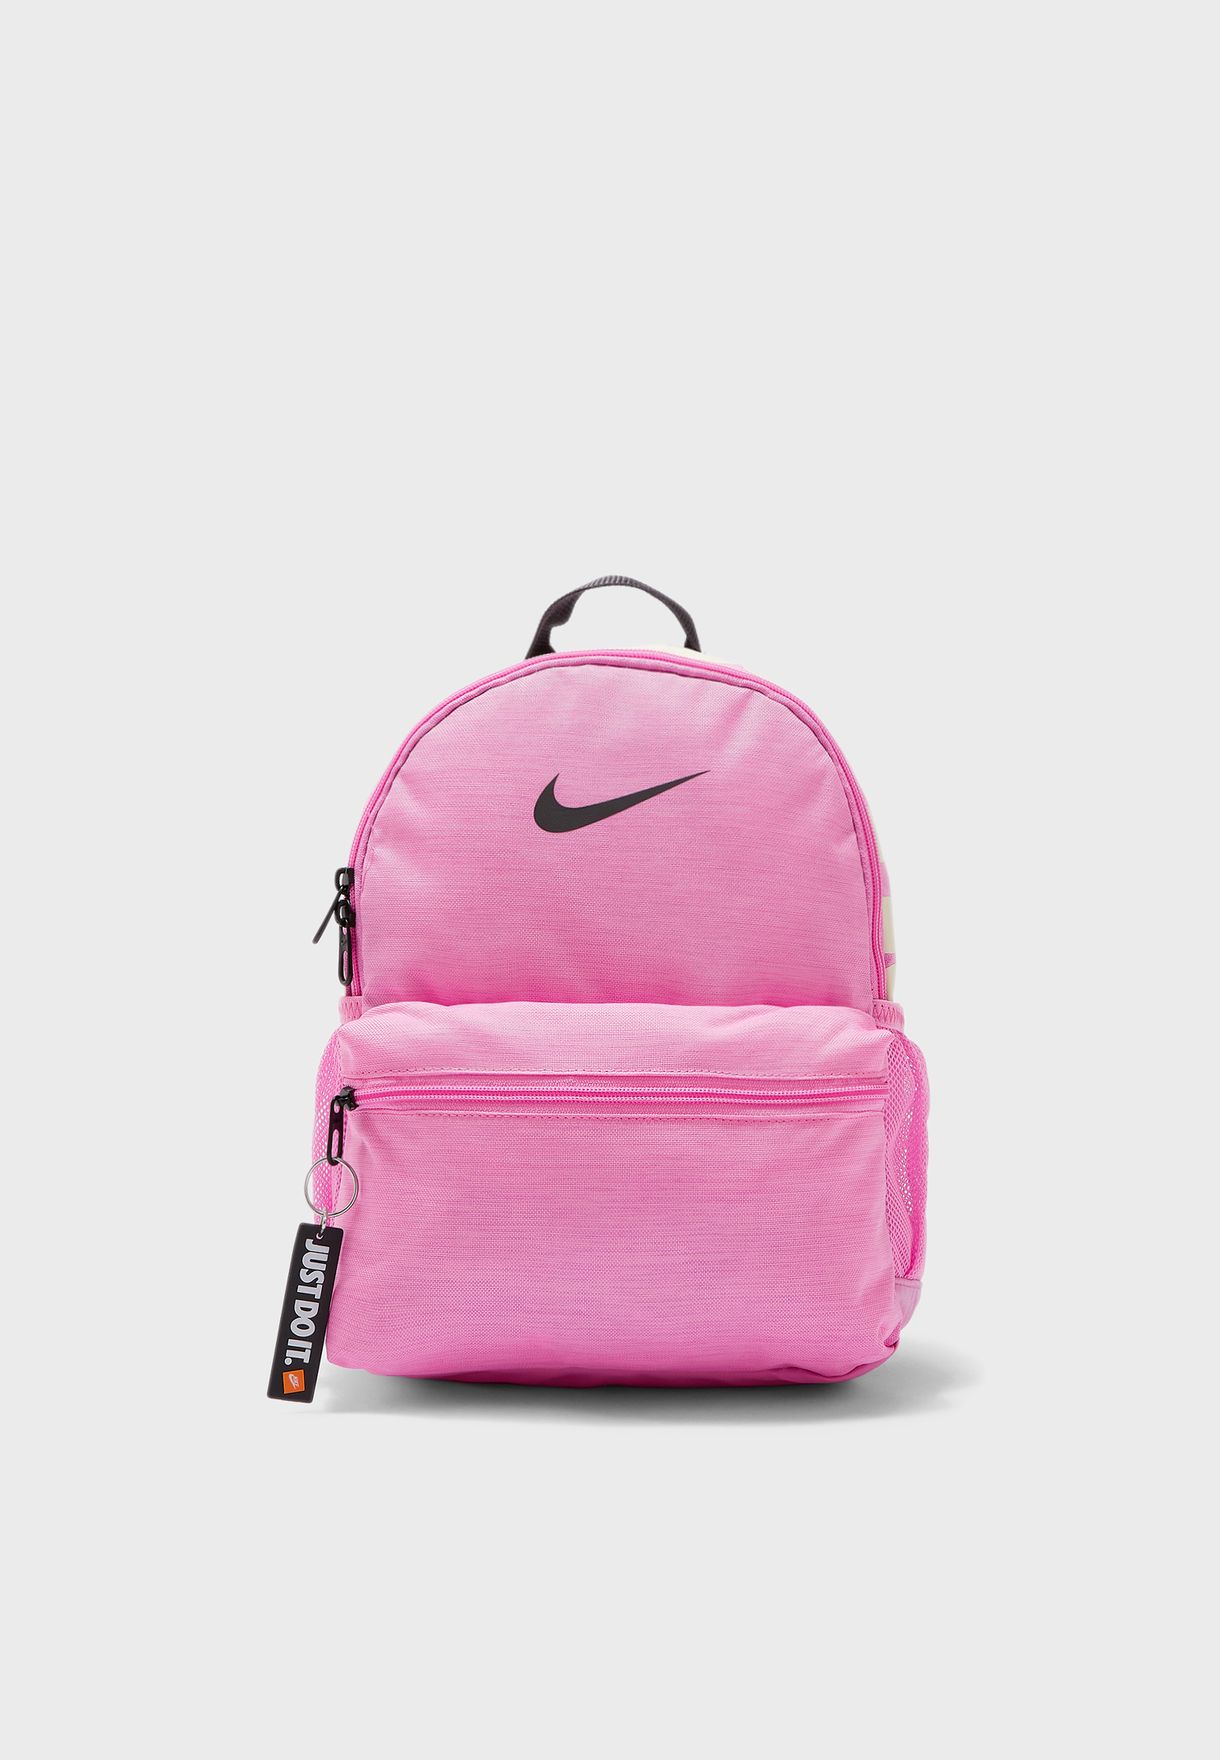 just do it bag pink